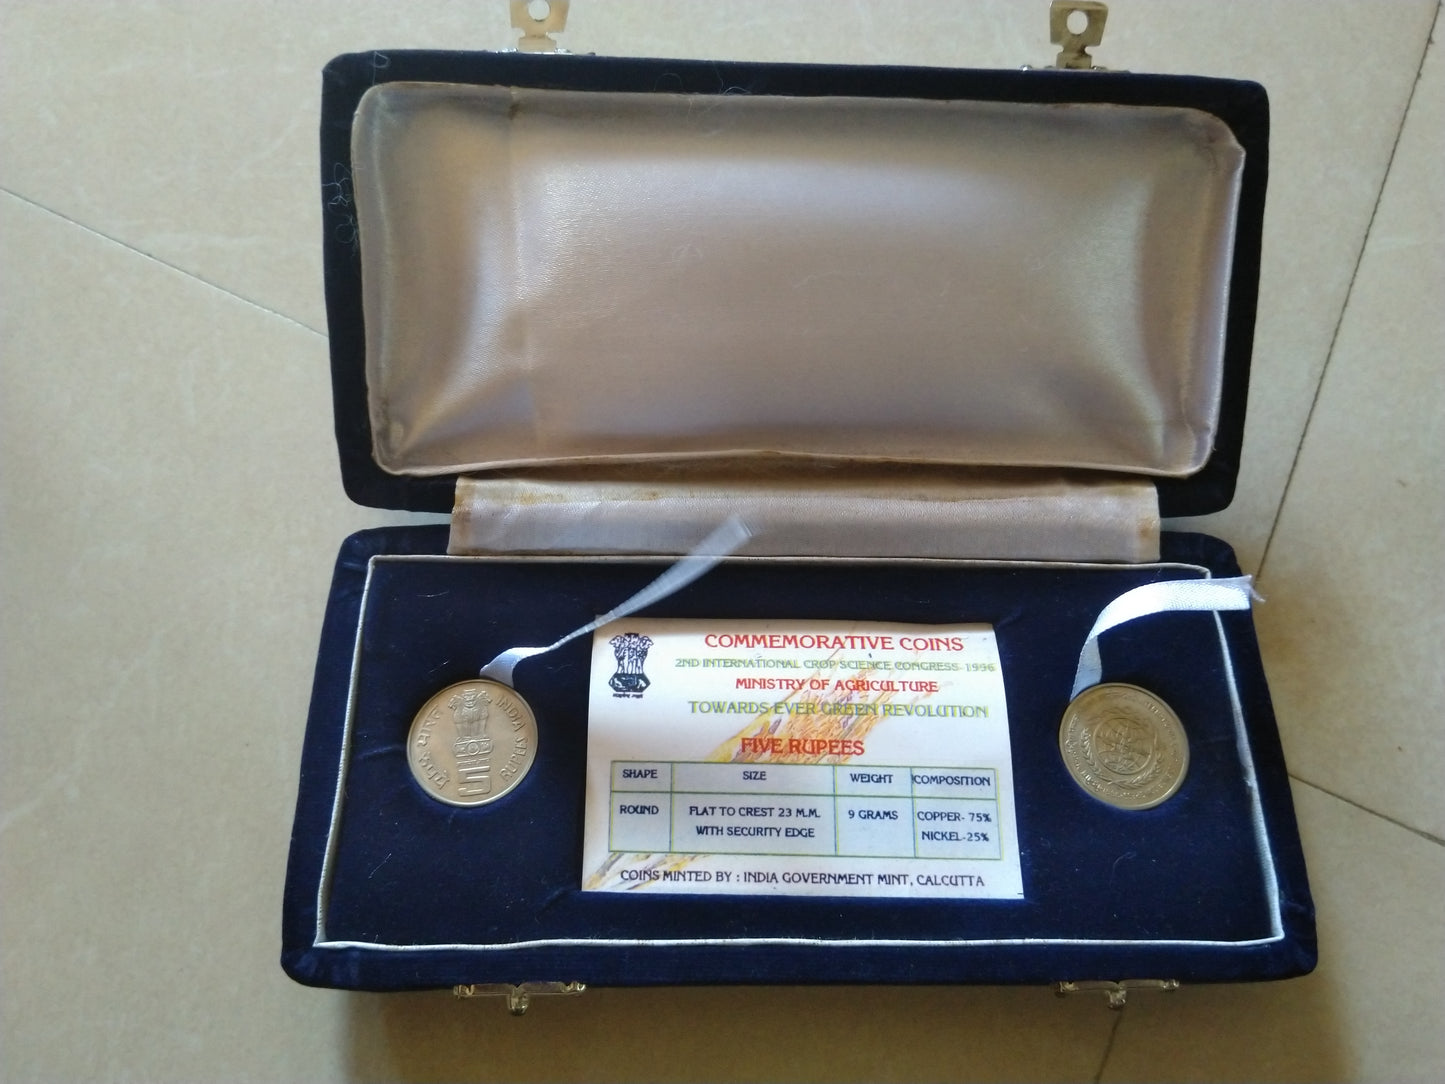 India 2nd international crop science Congress 1996 Proof coin in presentation pack